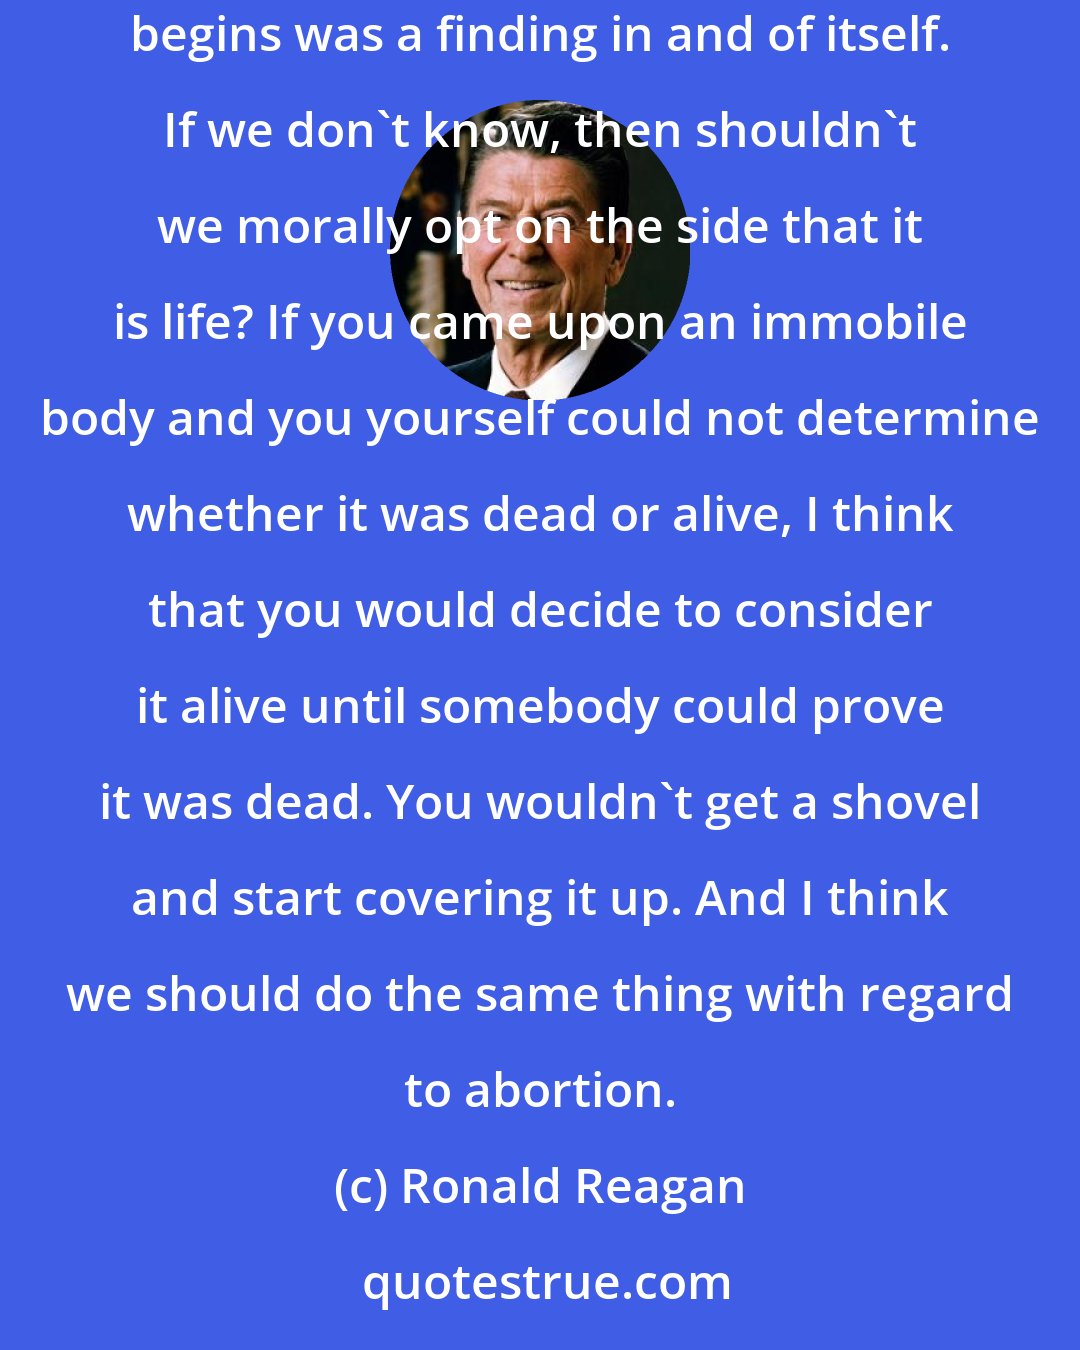 Ronald Reagan: I have been one who believes that abortion is the taking of a human life . . . . The fact that they could not resolve the issue of when life begins was a finding in and of itself. If we don't know, then shouldn't we morally opt on the side that it is life? If you came upon an immobile body and you yourself could not determine whether it was dead or alive, I think that you would decide to consider it alive until somebody could prove it was dead. You wouldn't get a shovel and start covering it up. And I think we should do the same thing with regard to abortion.